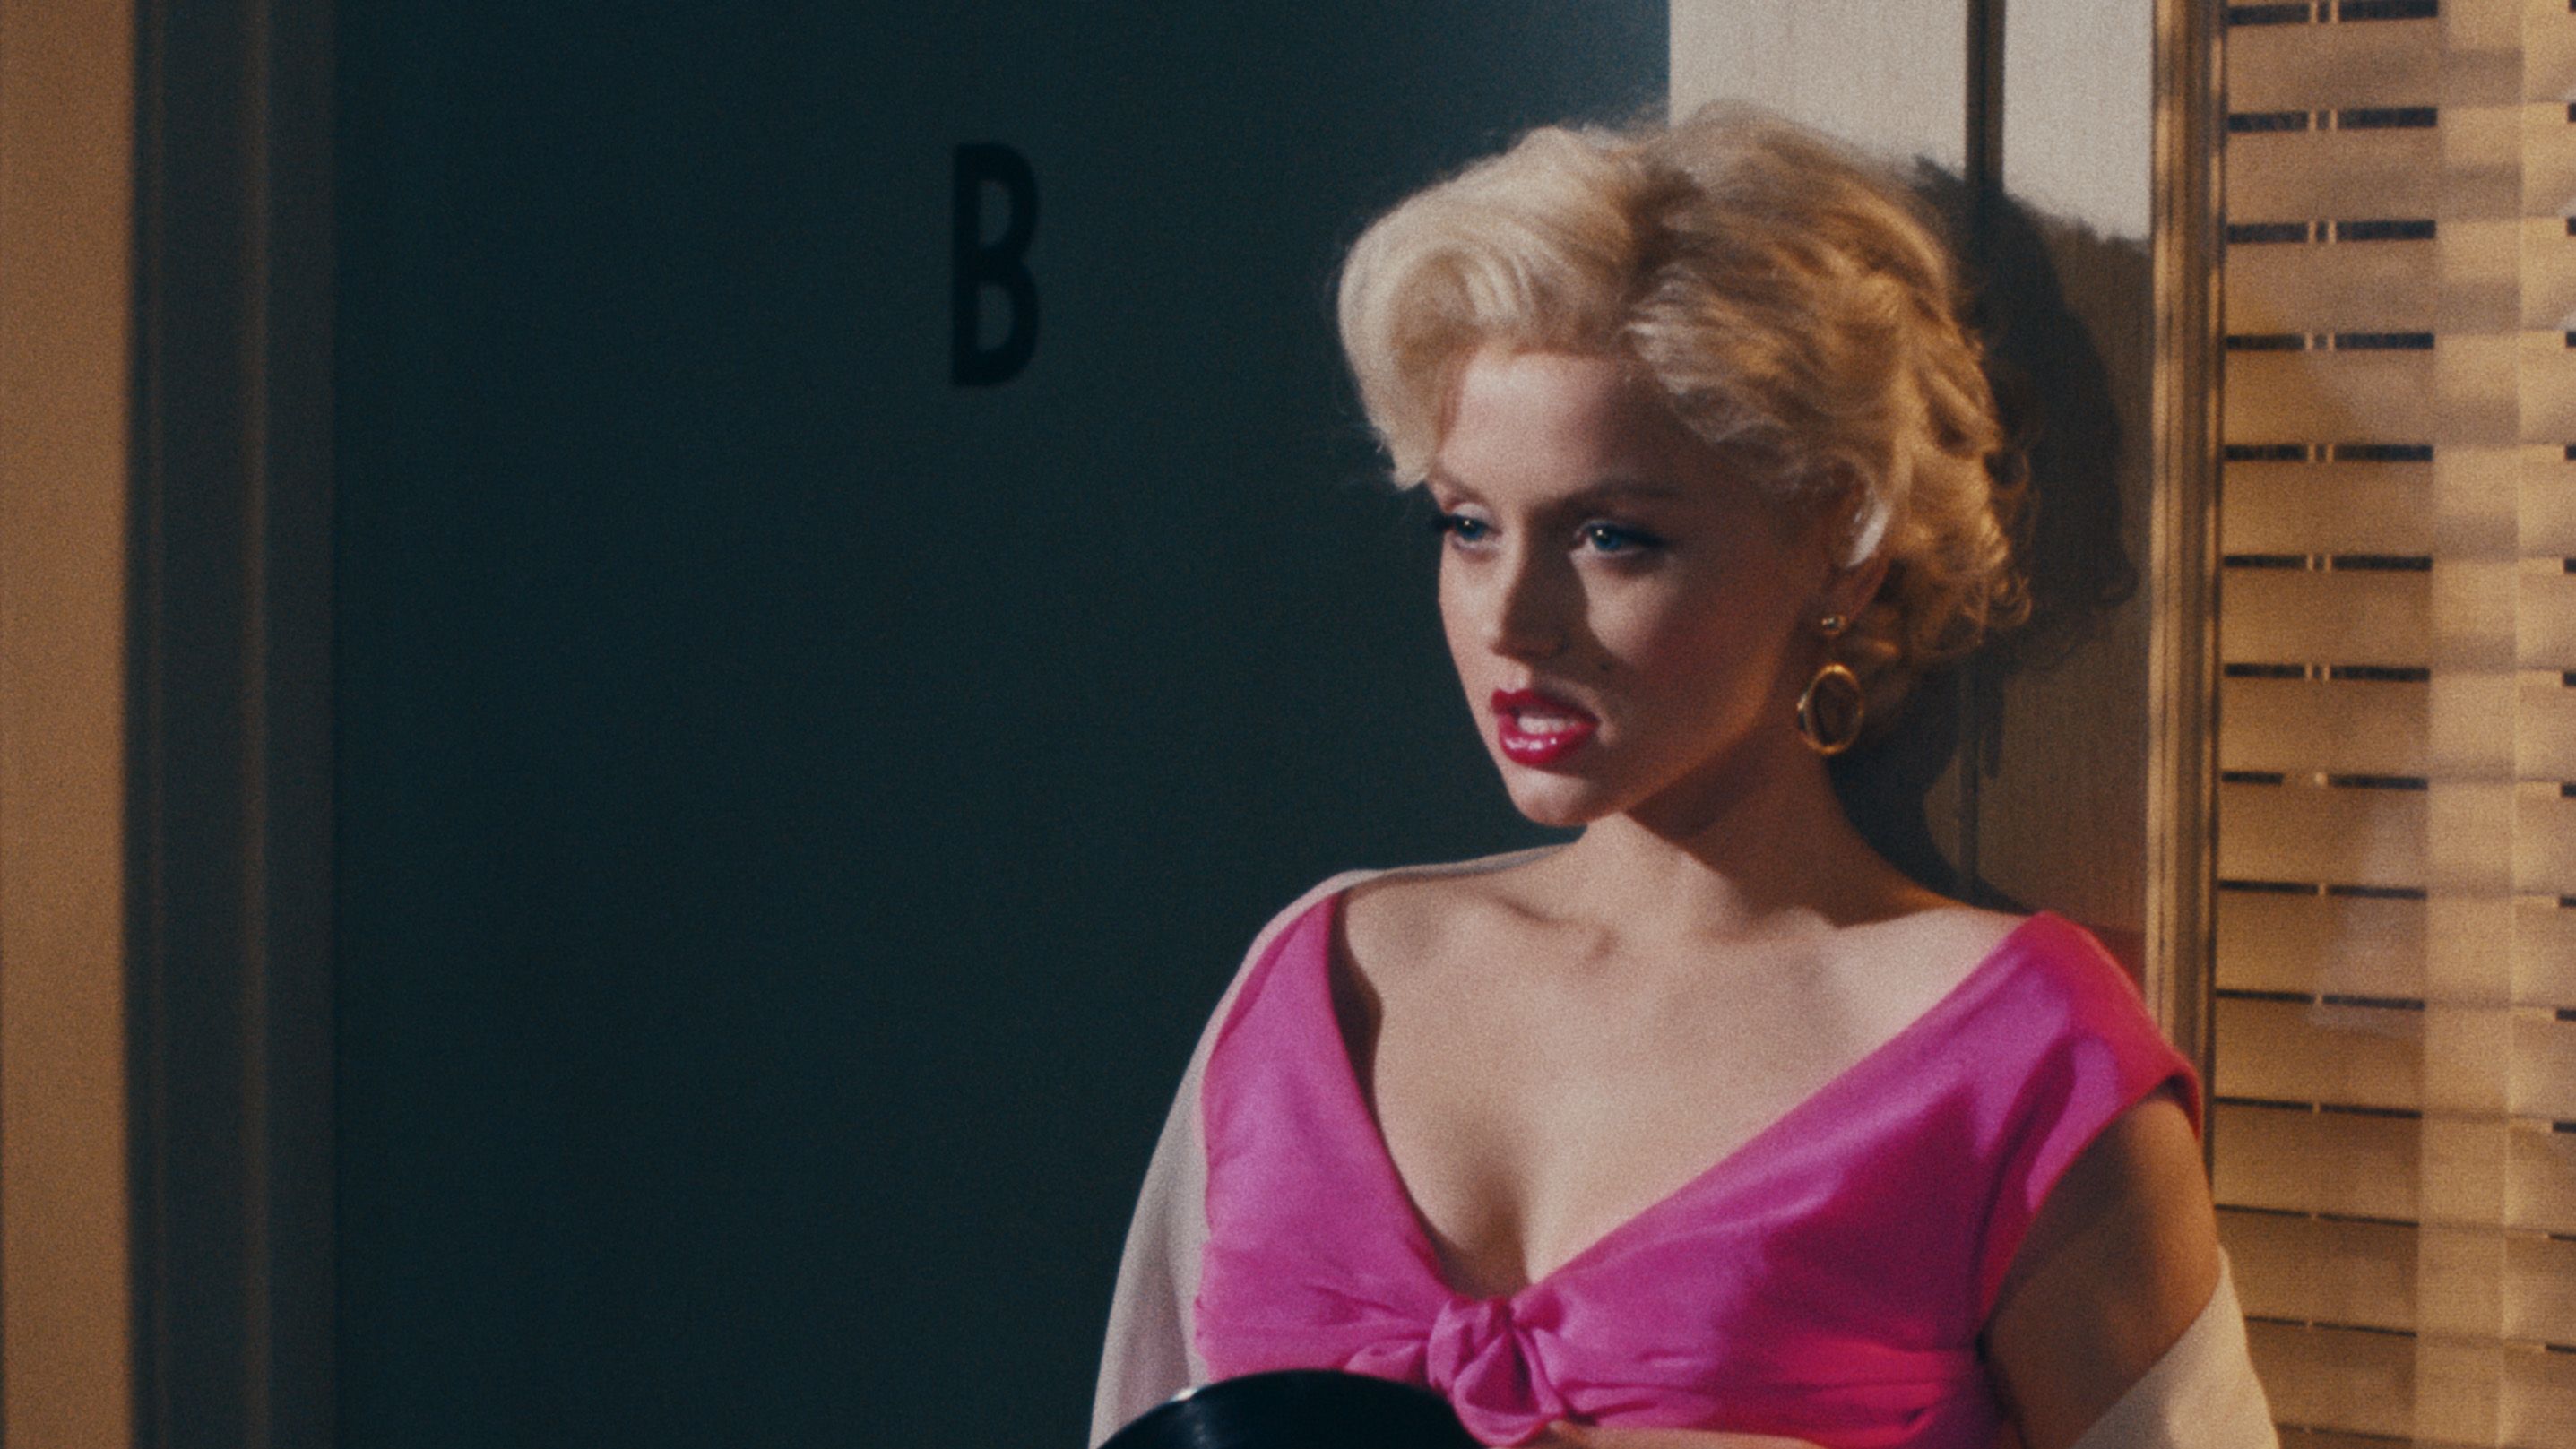 Little Blonde Feet Porn - The Wigs, Makeup, and Costumes Behind Ana de Armas' Marilyn Monroe  Transformation in 'Blonde'